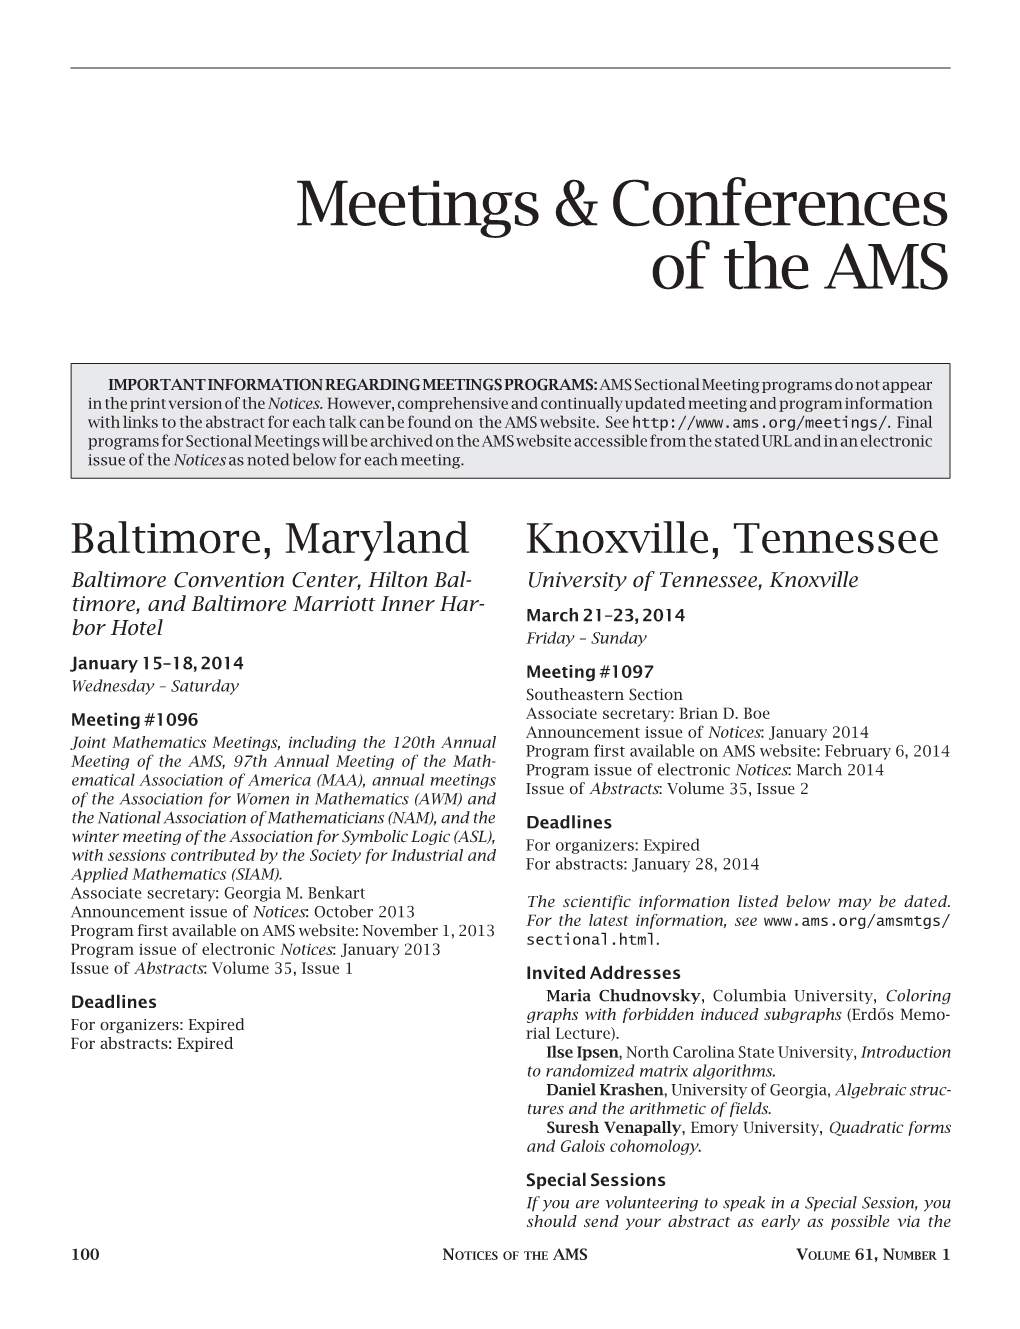 Meetings & Conferences of The